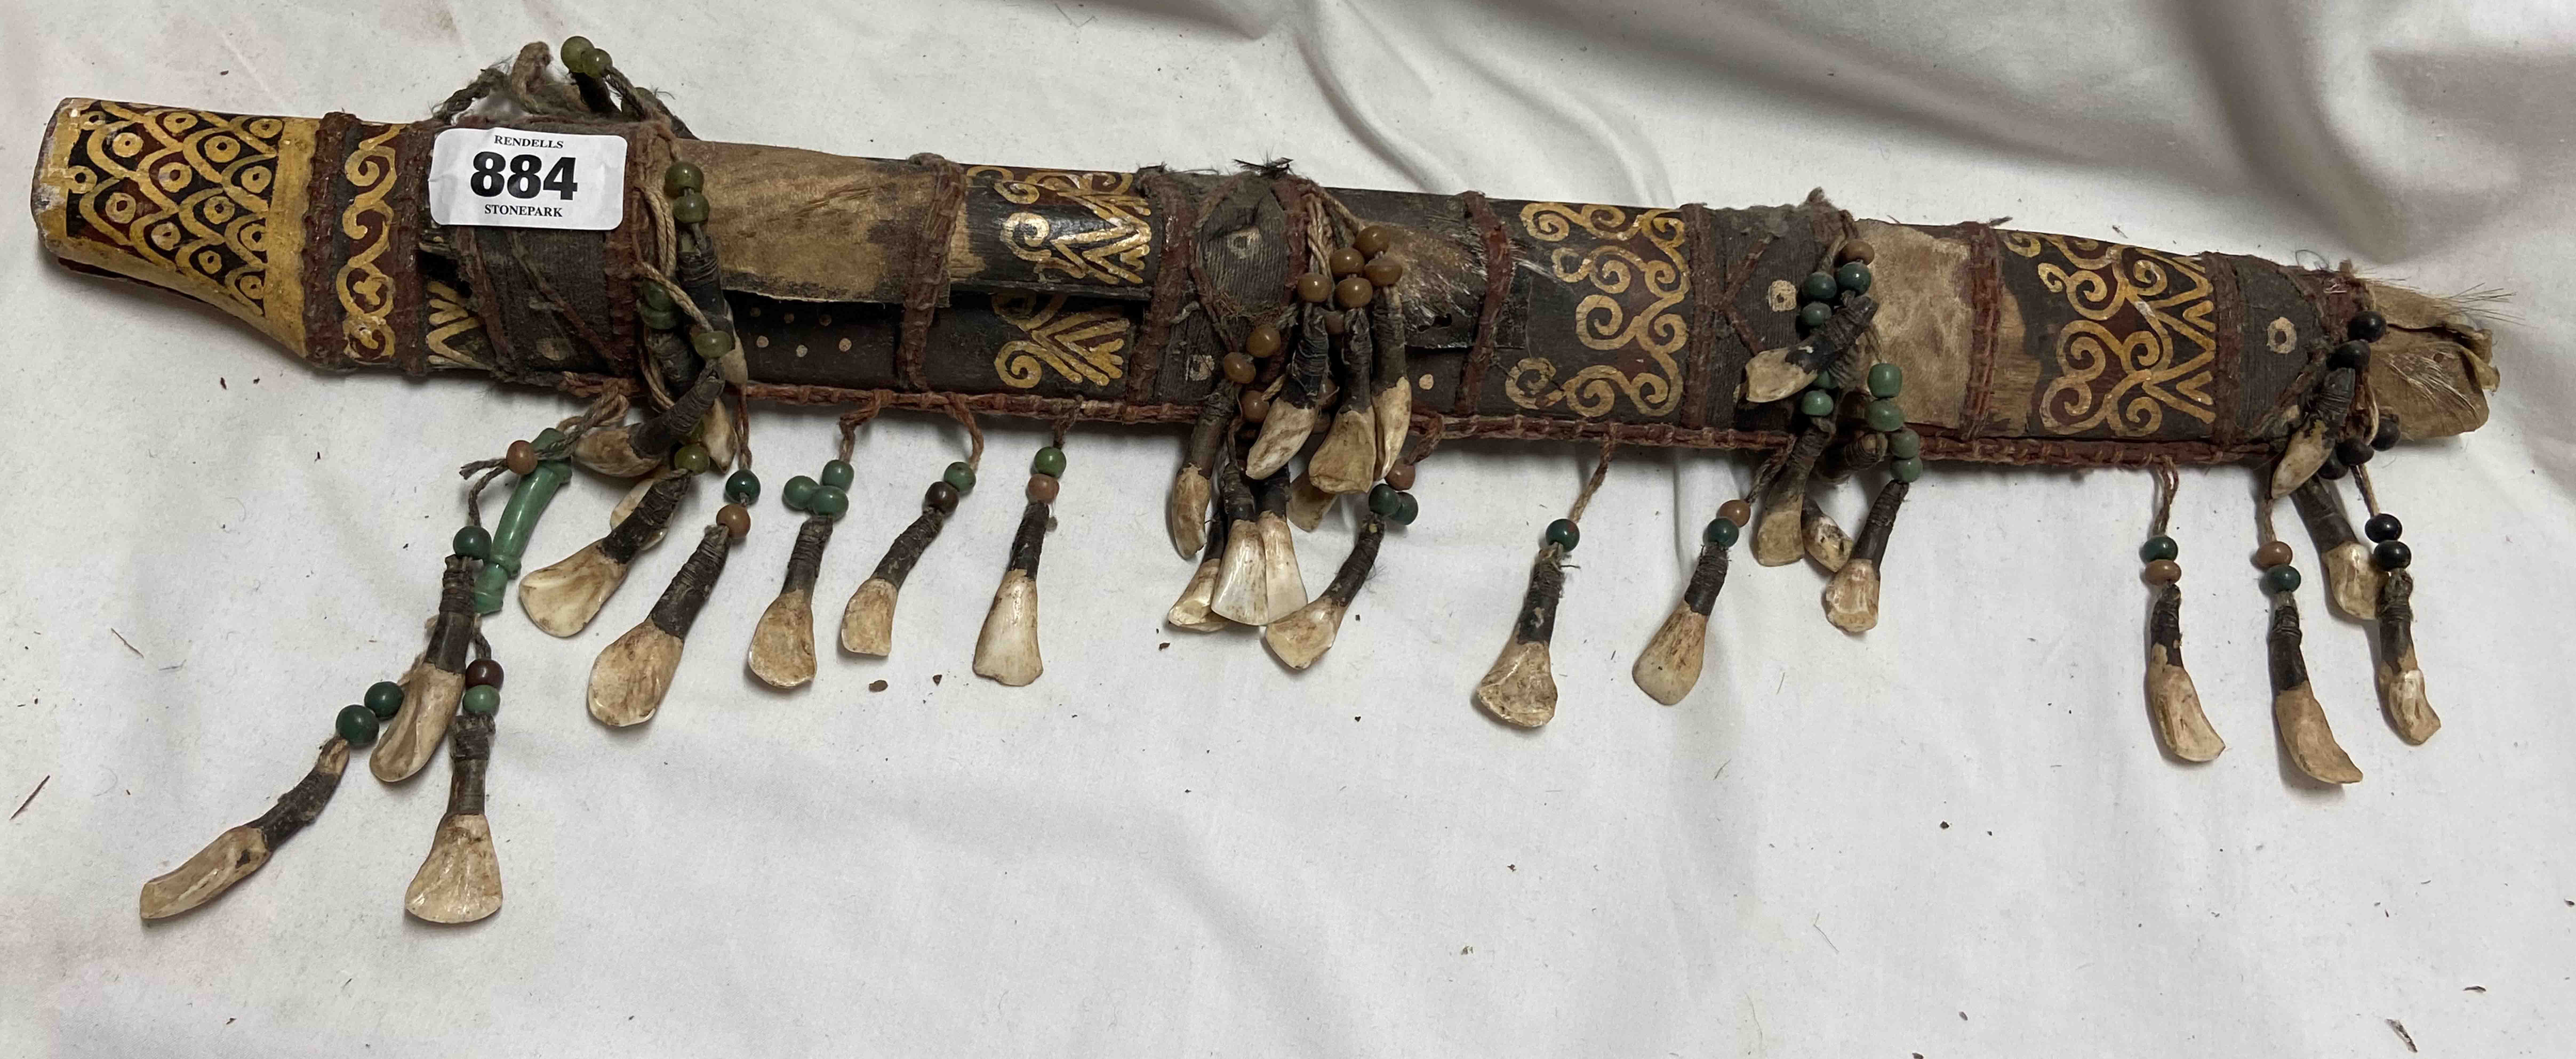 A Tibetan scabbard with tribal painted decoration and adorned with hanging teeth